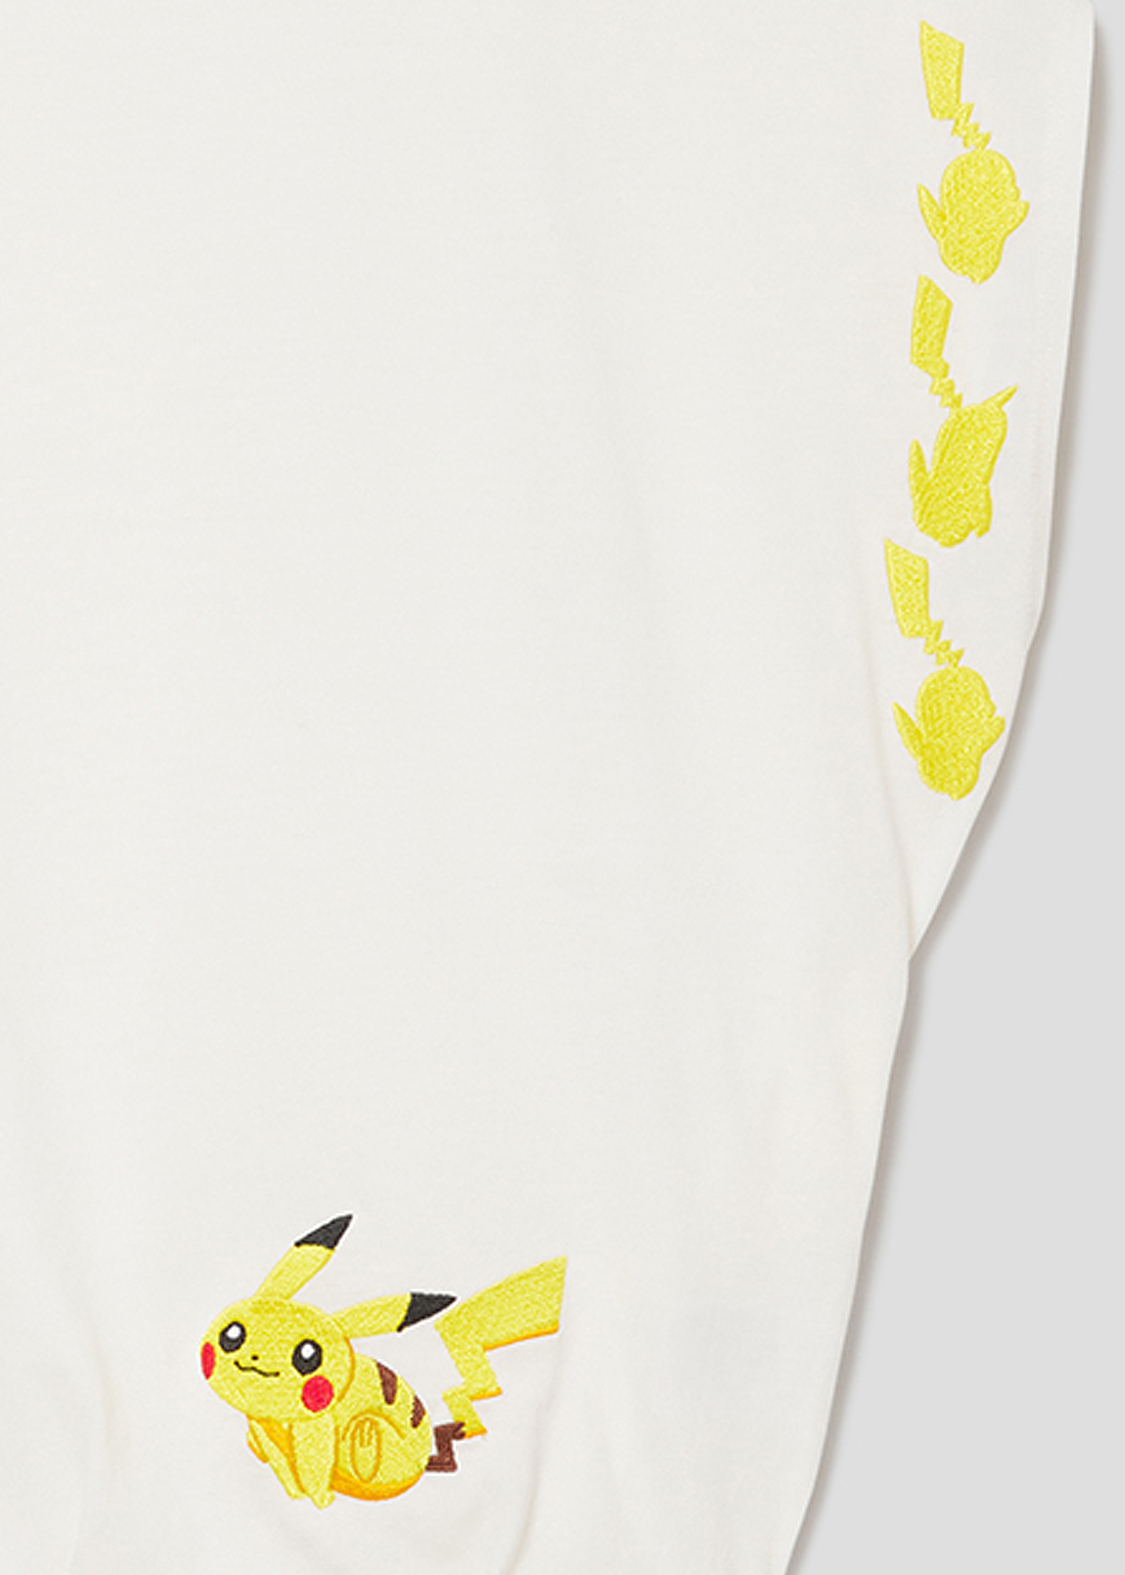 22 new kinds of Pokémon apparel coming soon from popular T-shirt